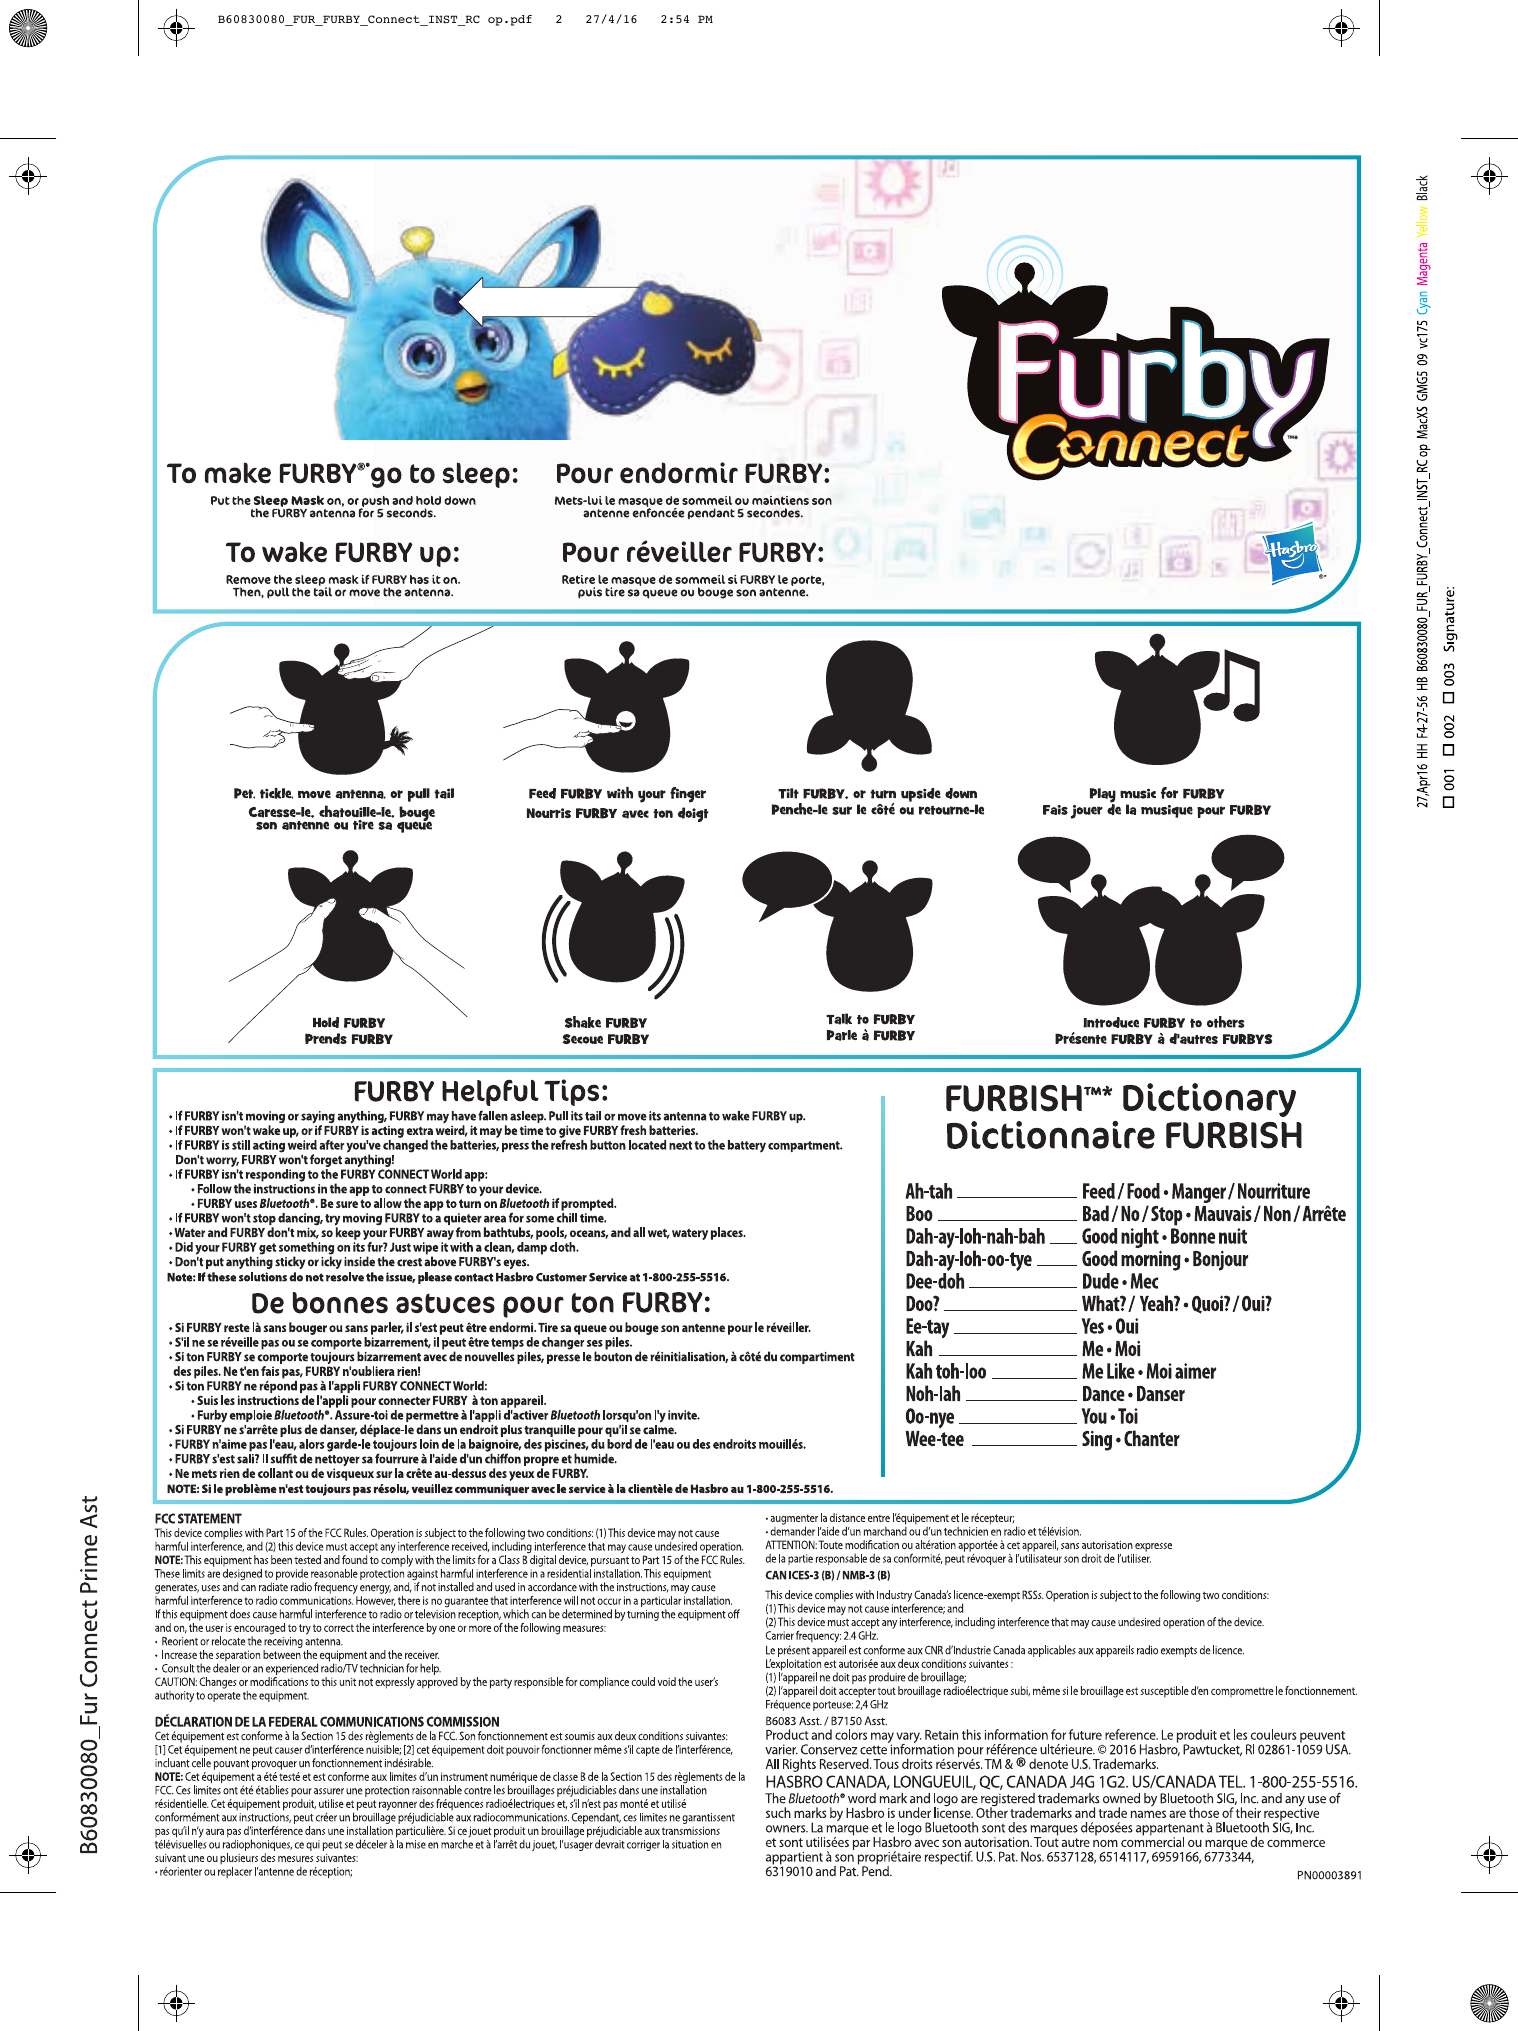 Furby connect instruction manual download